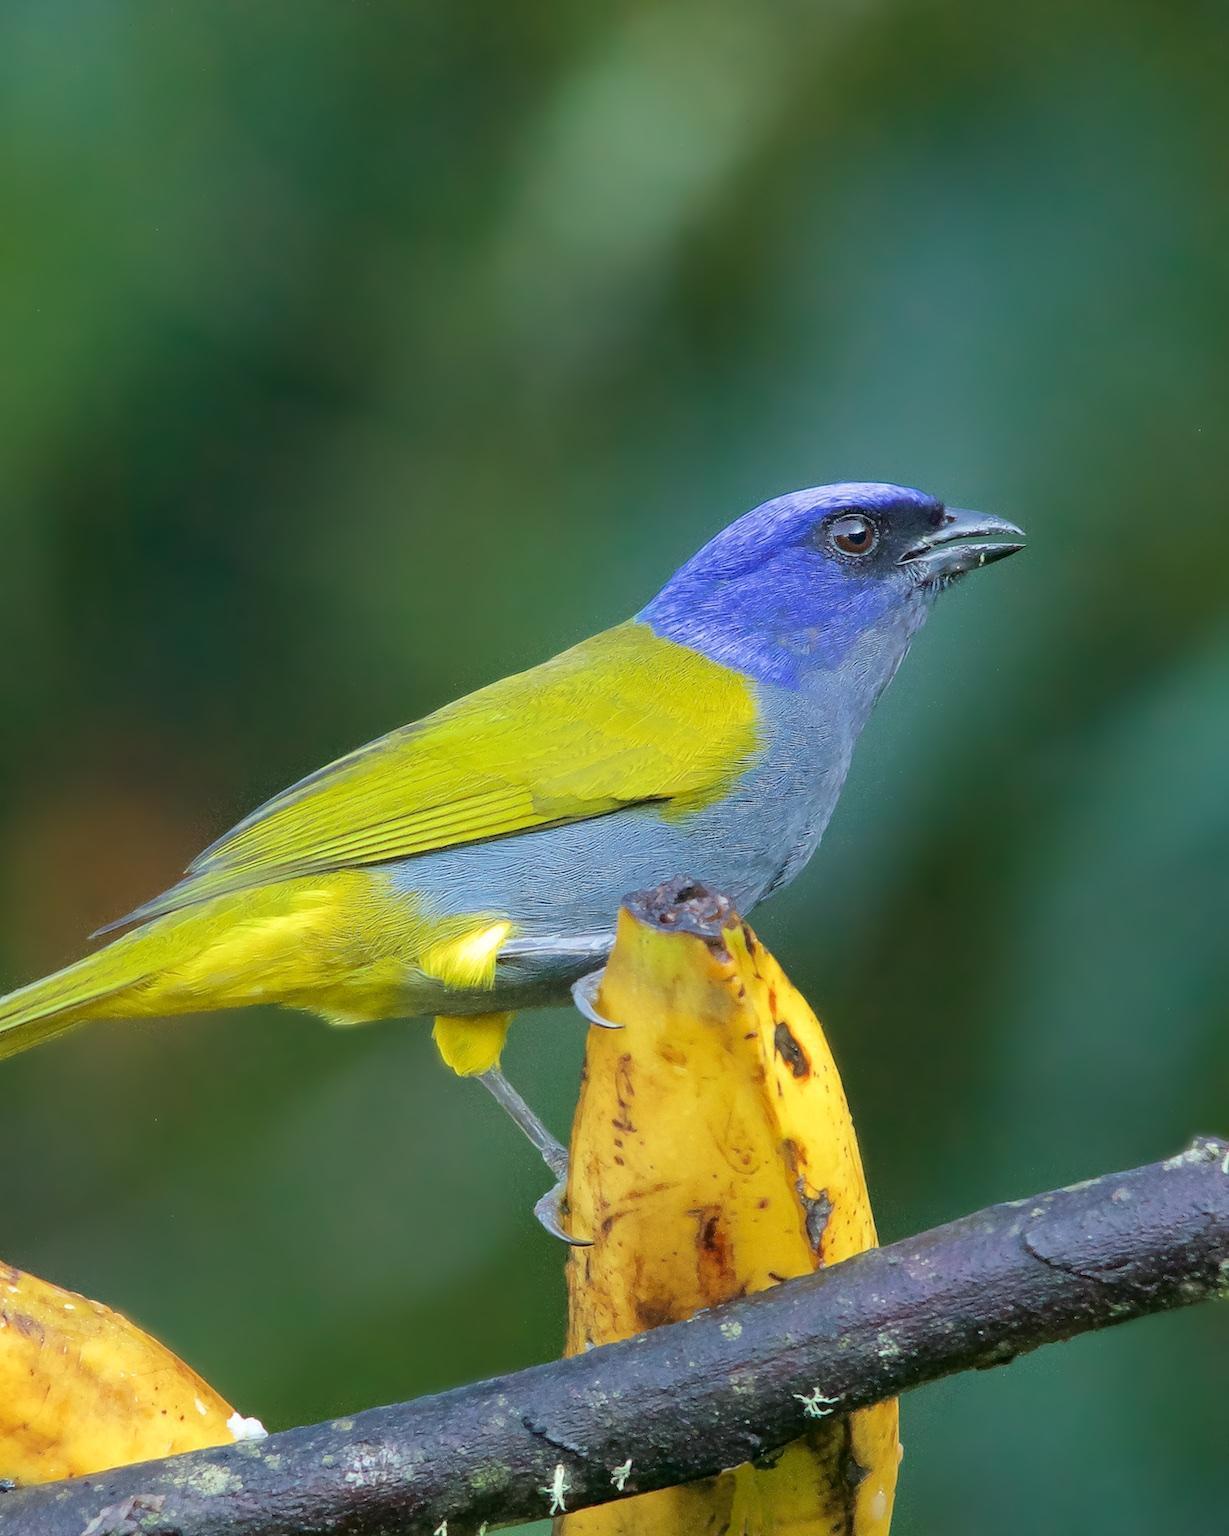 Blue-capped Tanager Photo by Denis Rivard